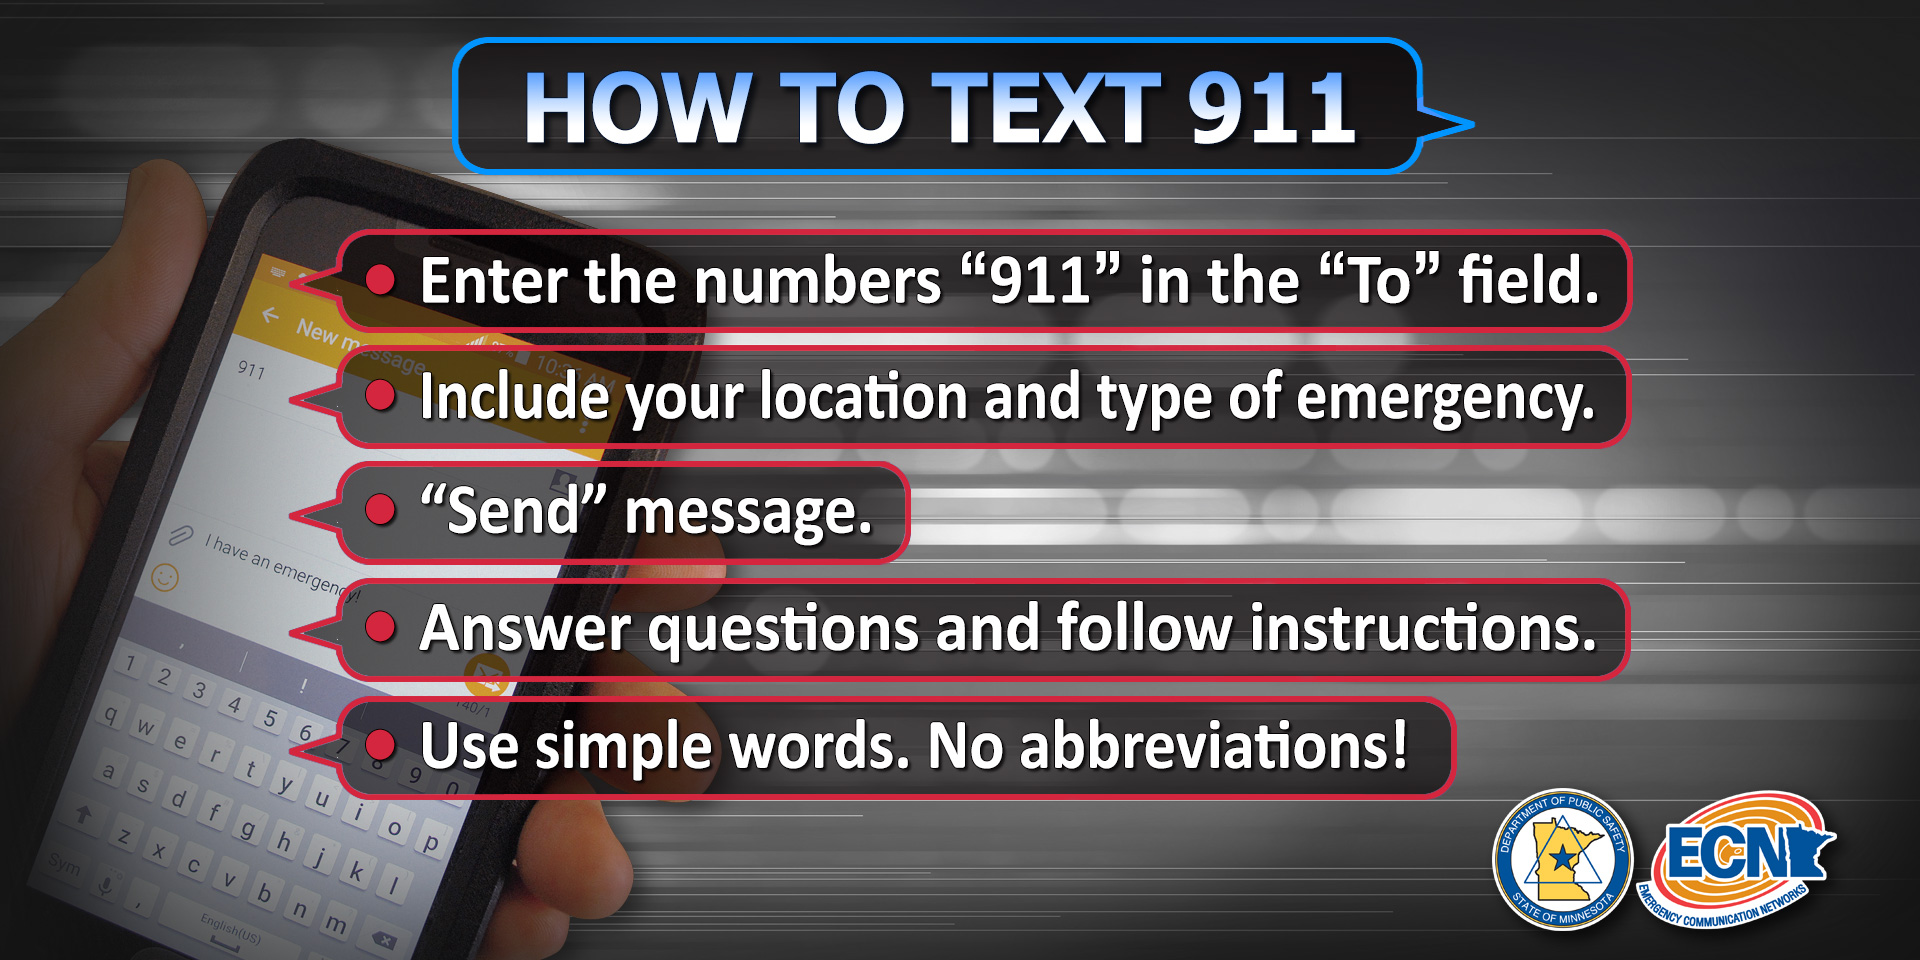 How to text 911 graphic showing listing steps the same steps detailed on the web page.